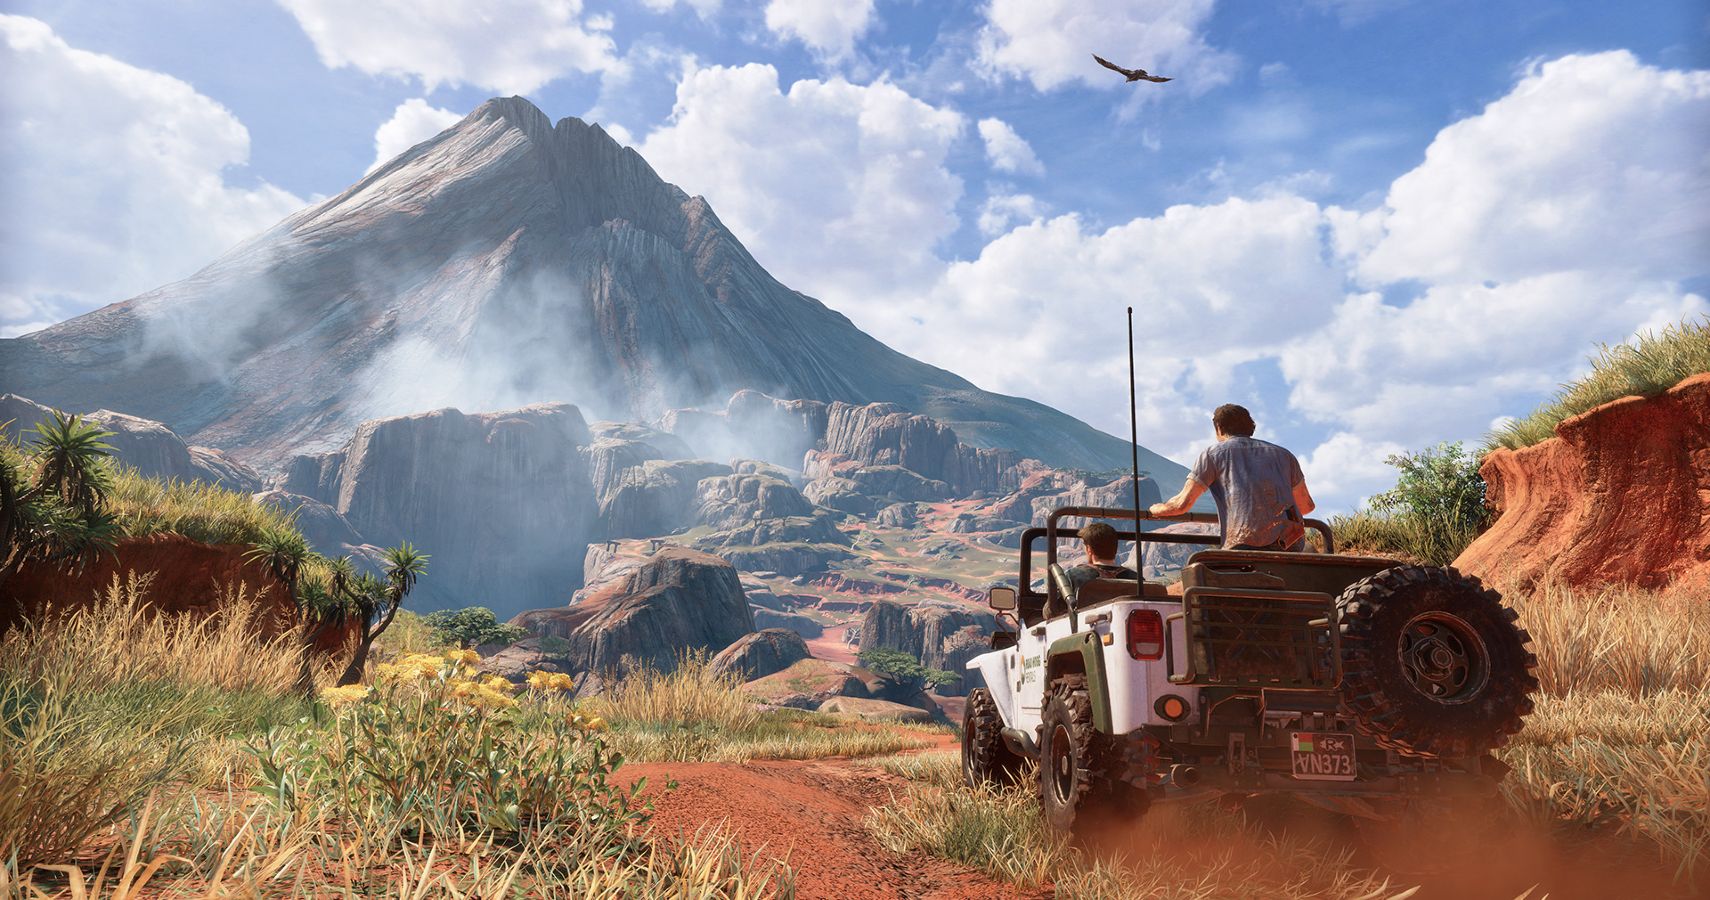 Uncharted 4 Is The Next PlayStation Game To Get PC Treatment